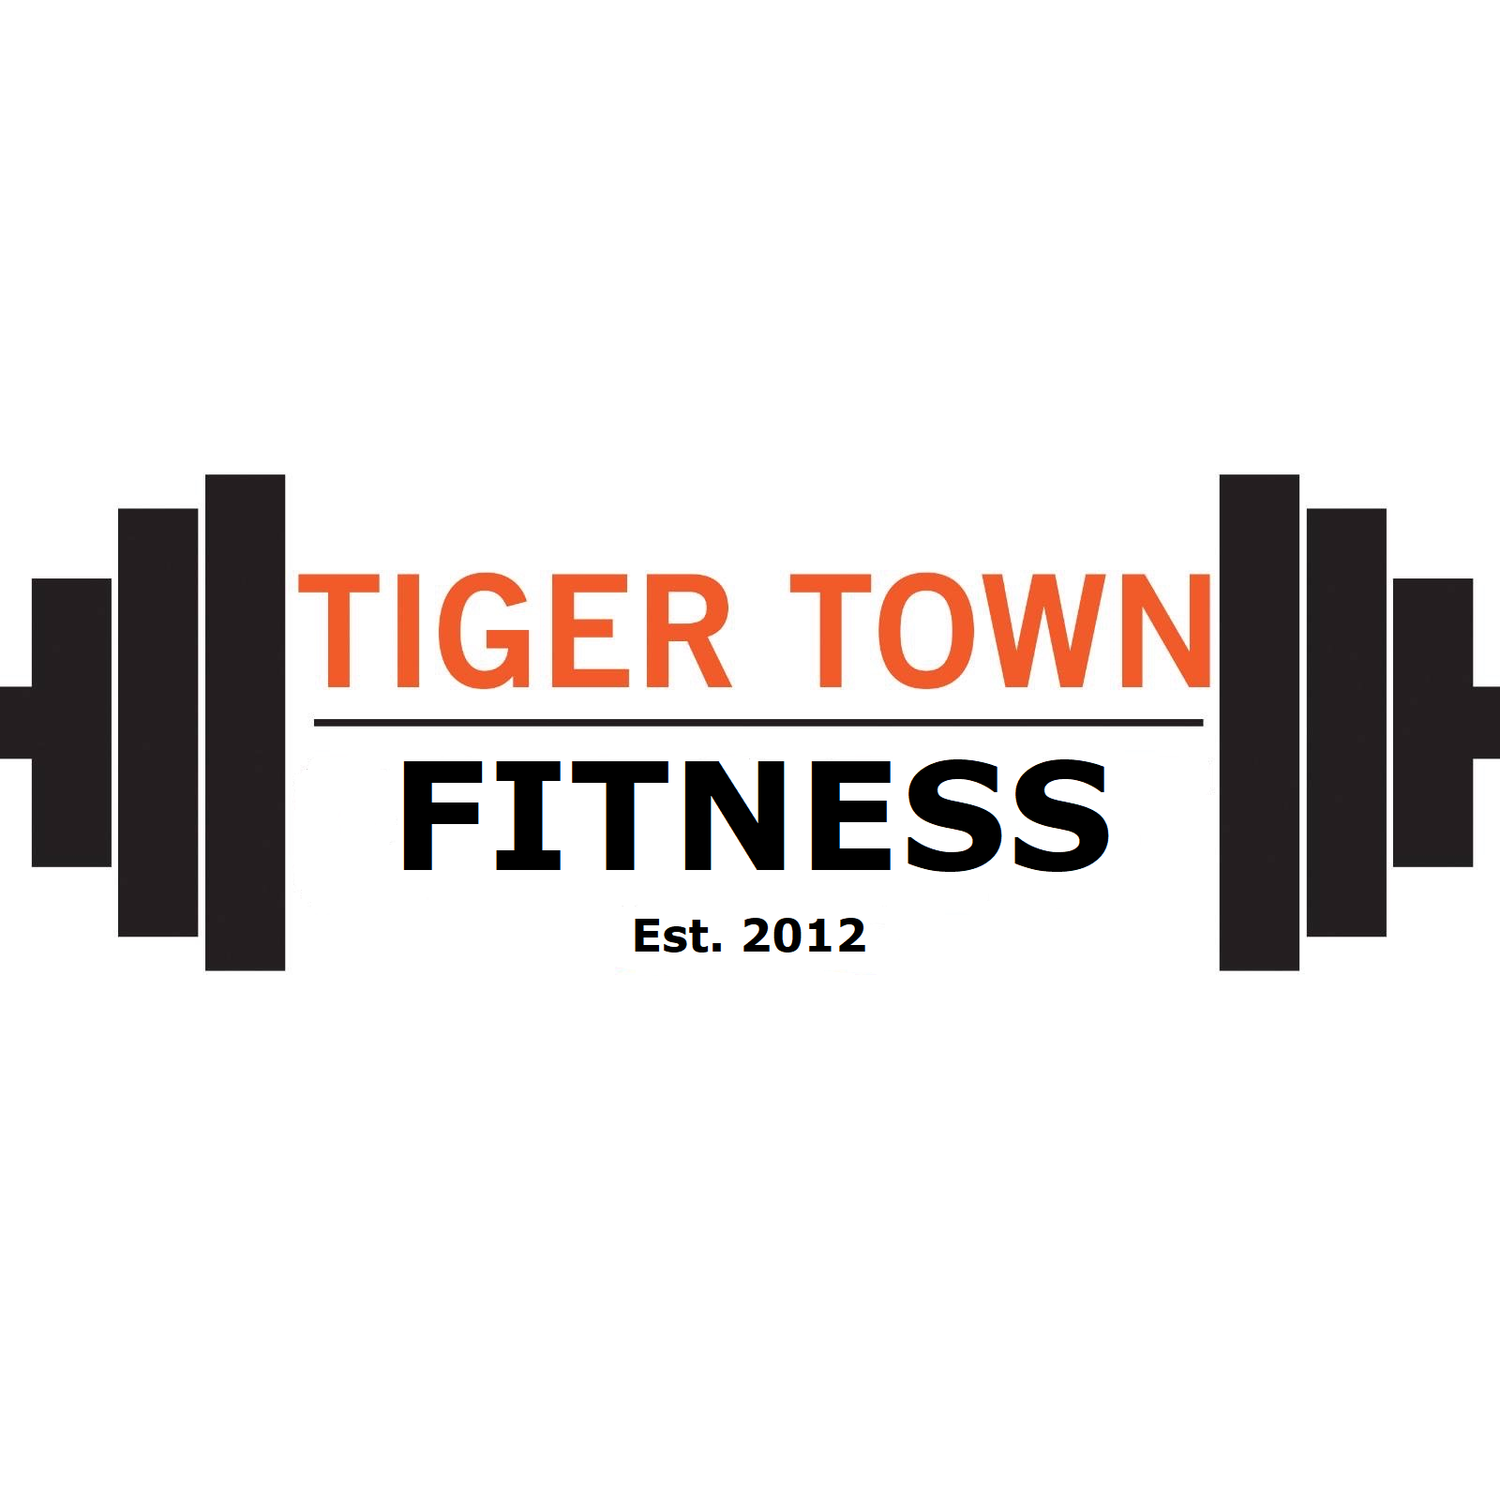 Tiger Town Fitness